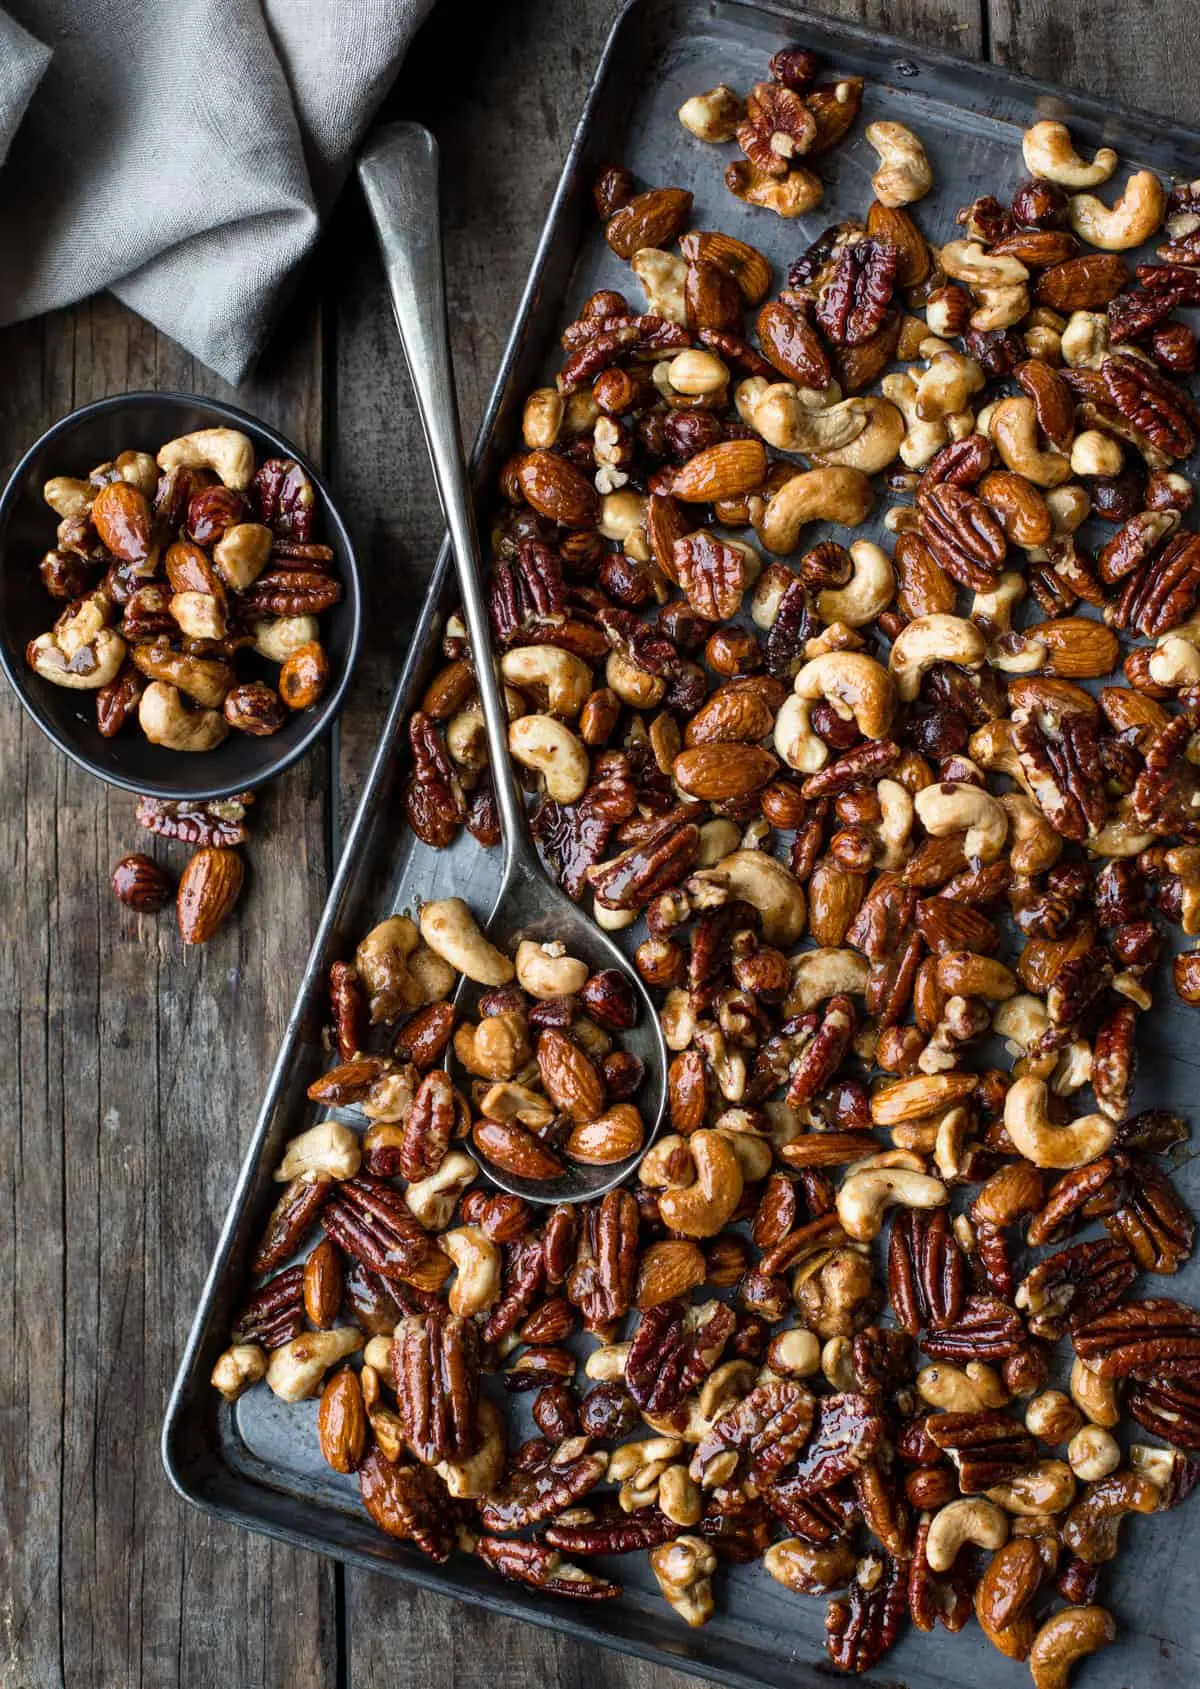 cold smoked nuts recipe - How long do you cold smoke pistachios